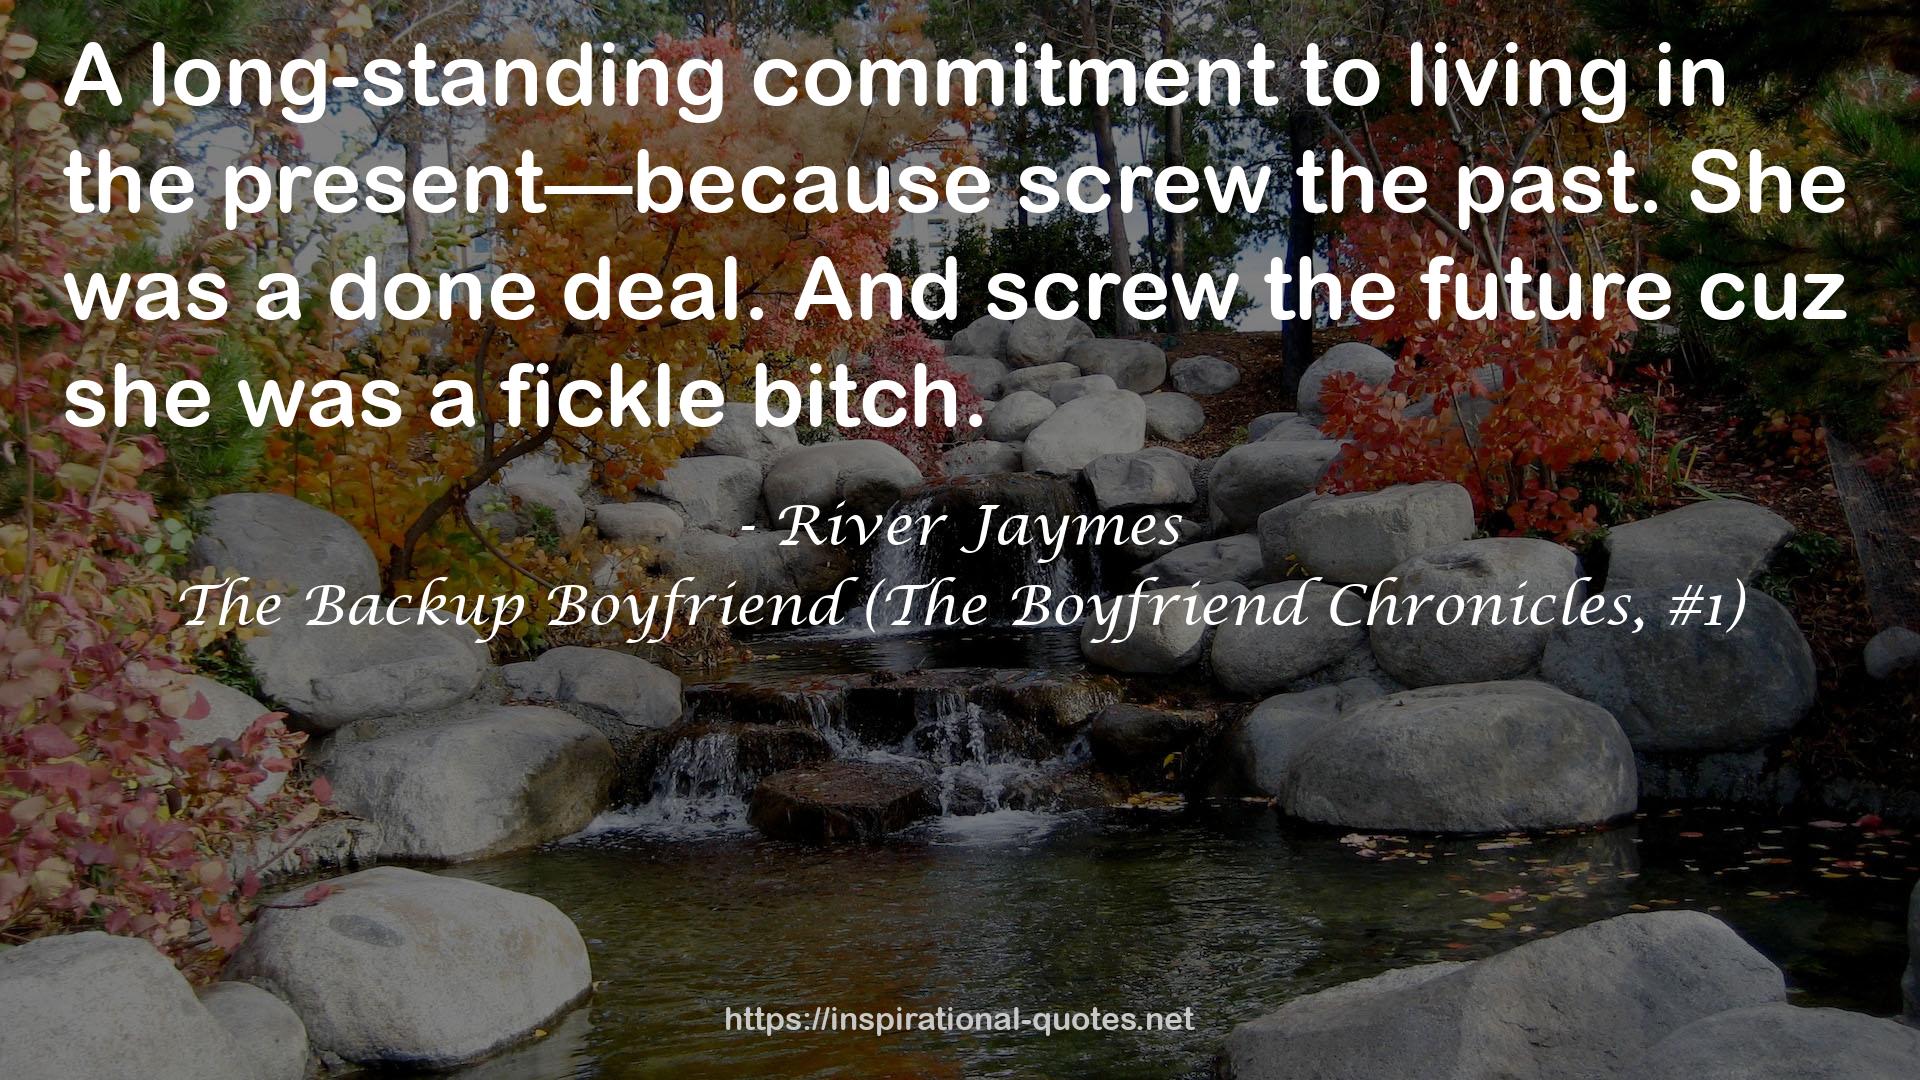 River Jaymes QUOTES